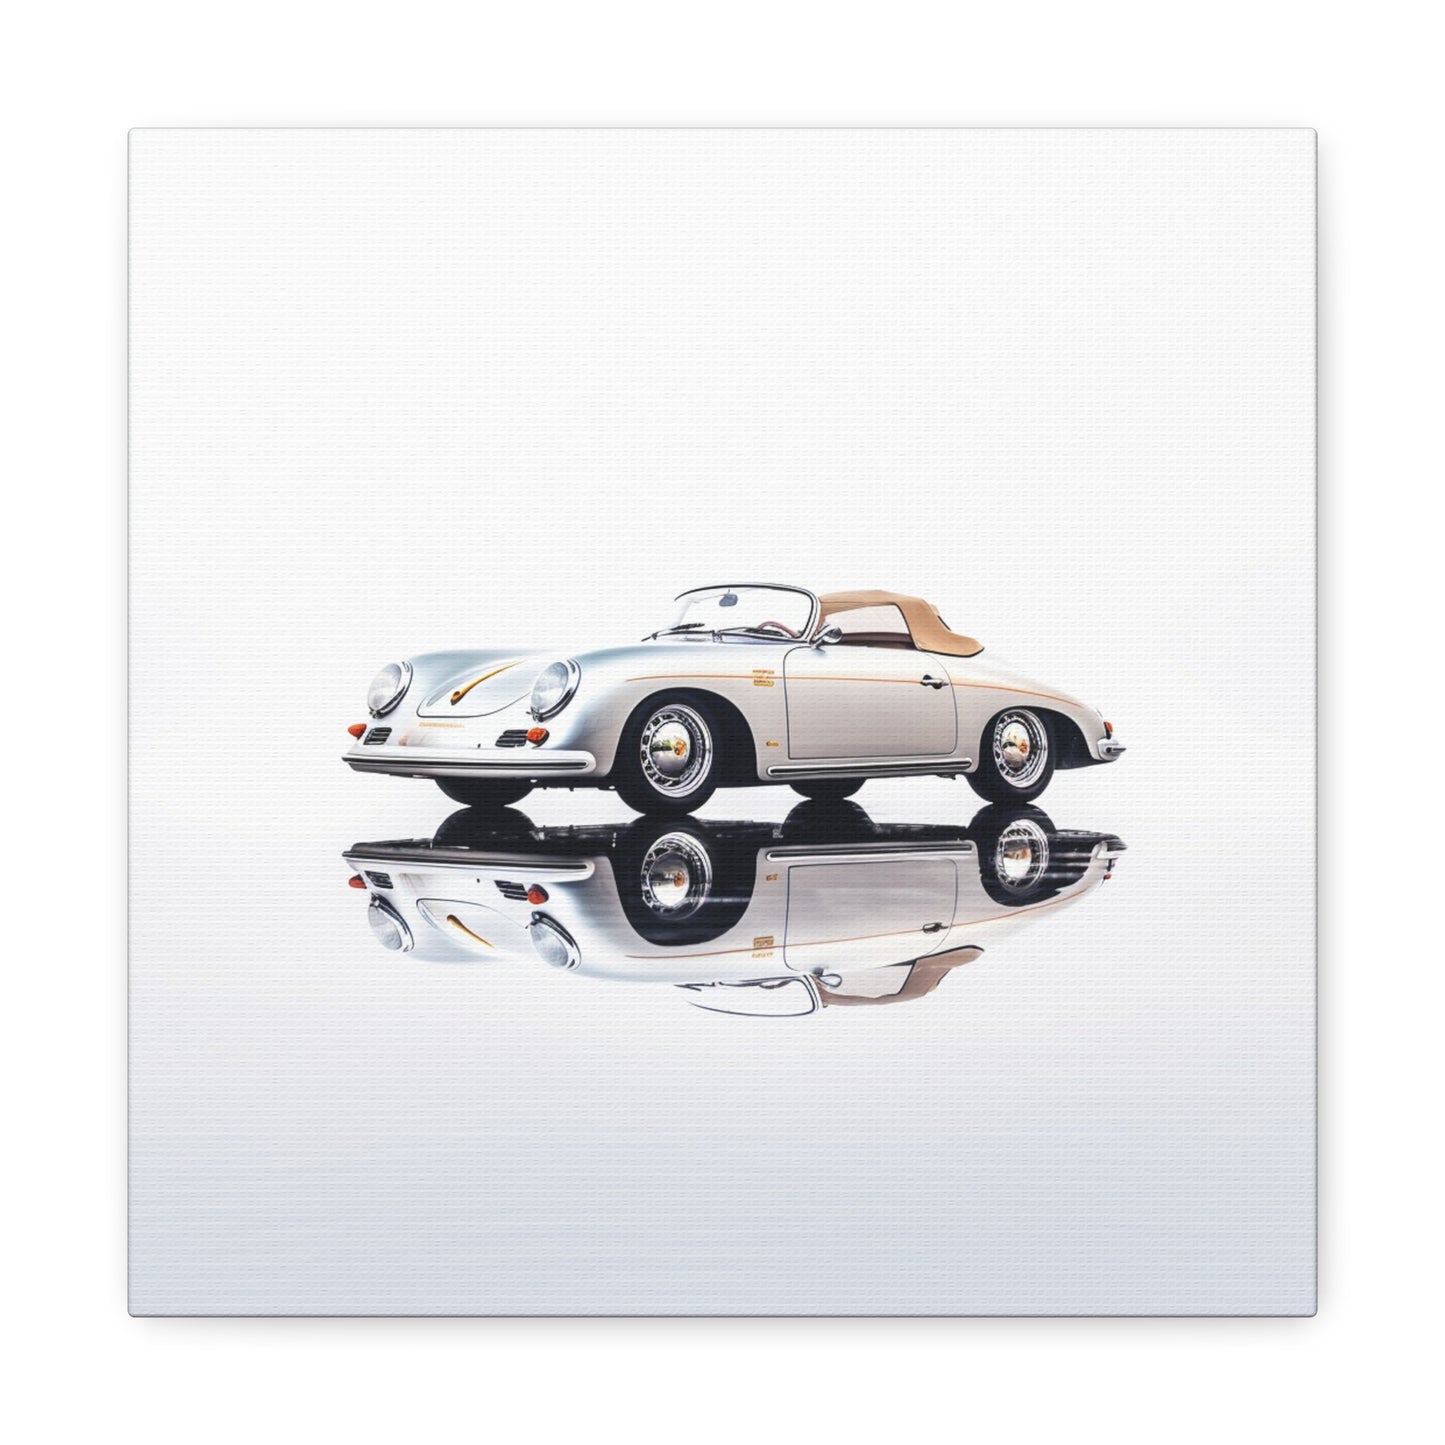 Canvas Gallery Wraps 911 Speedster on water 2